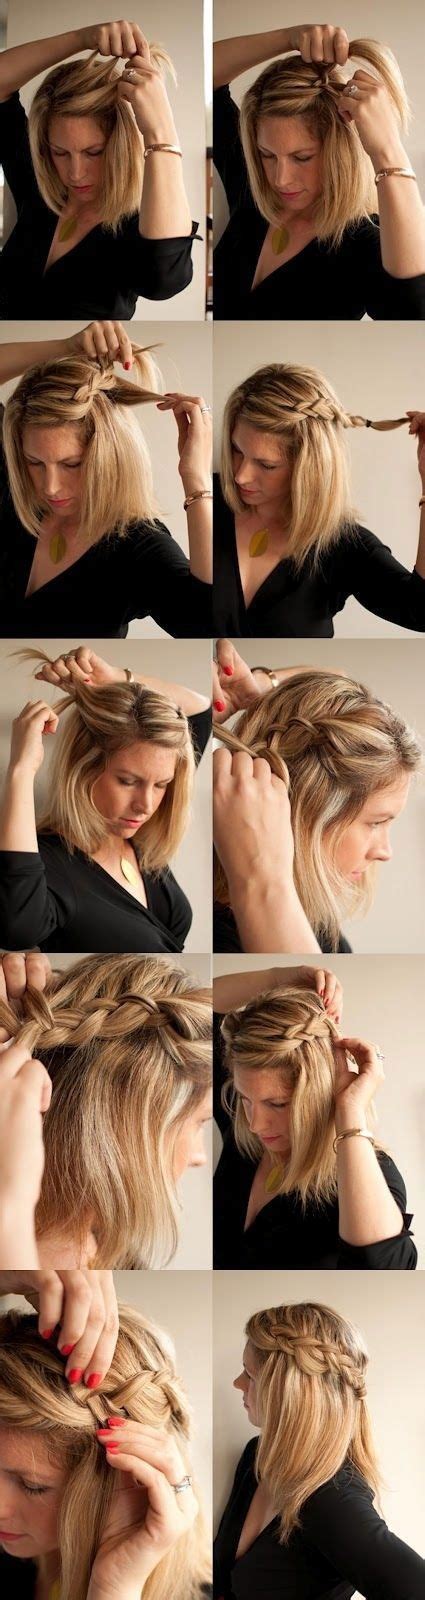 Thick hair might be difficult to work with. 15 Cute and Easy Hairstyle Tutorials For Medium-Length ...